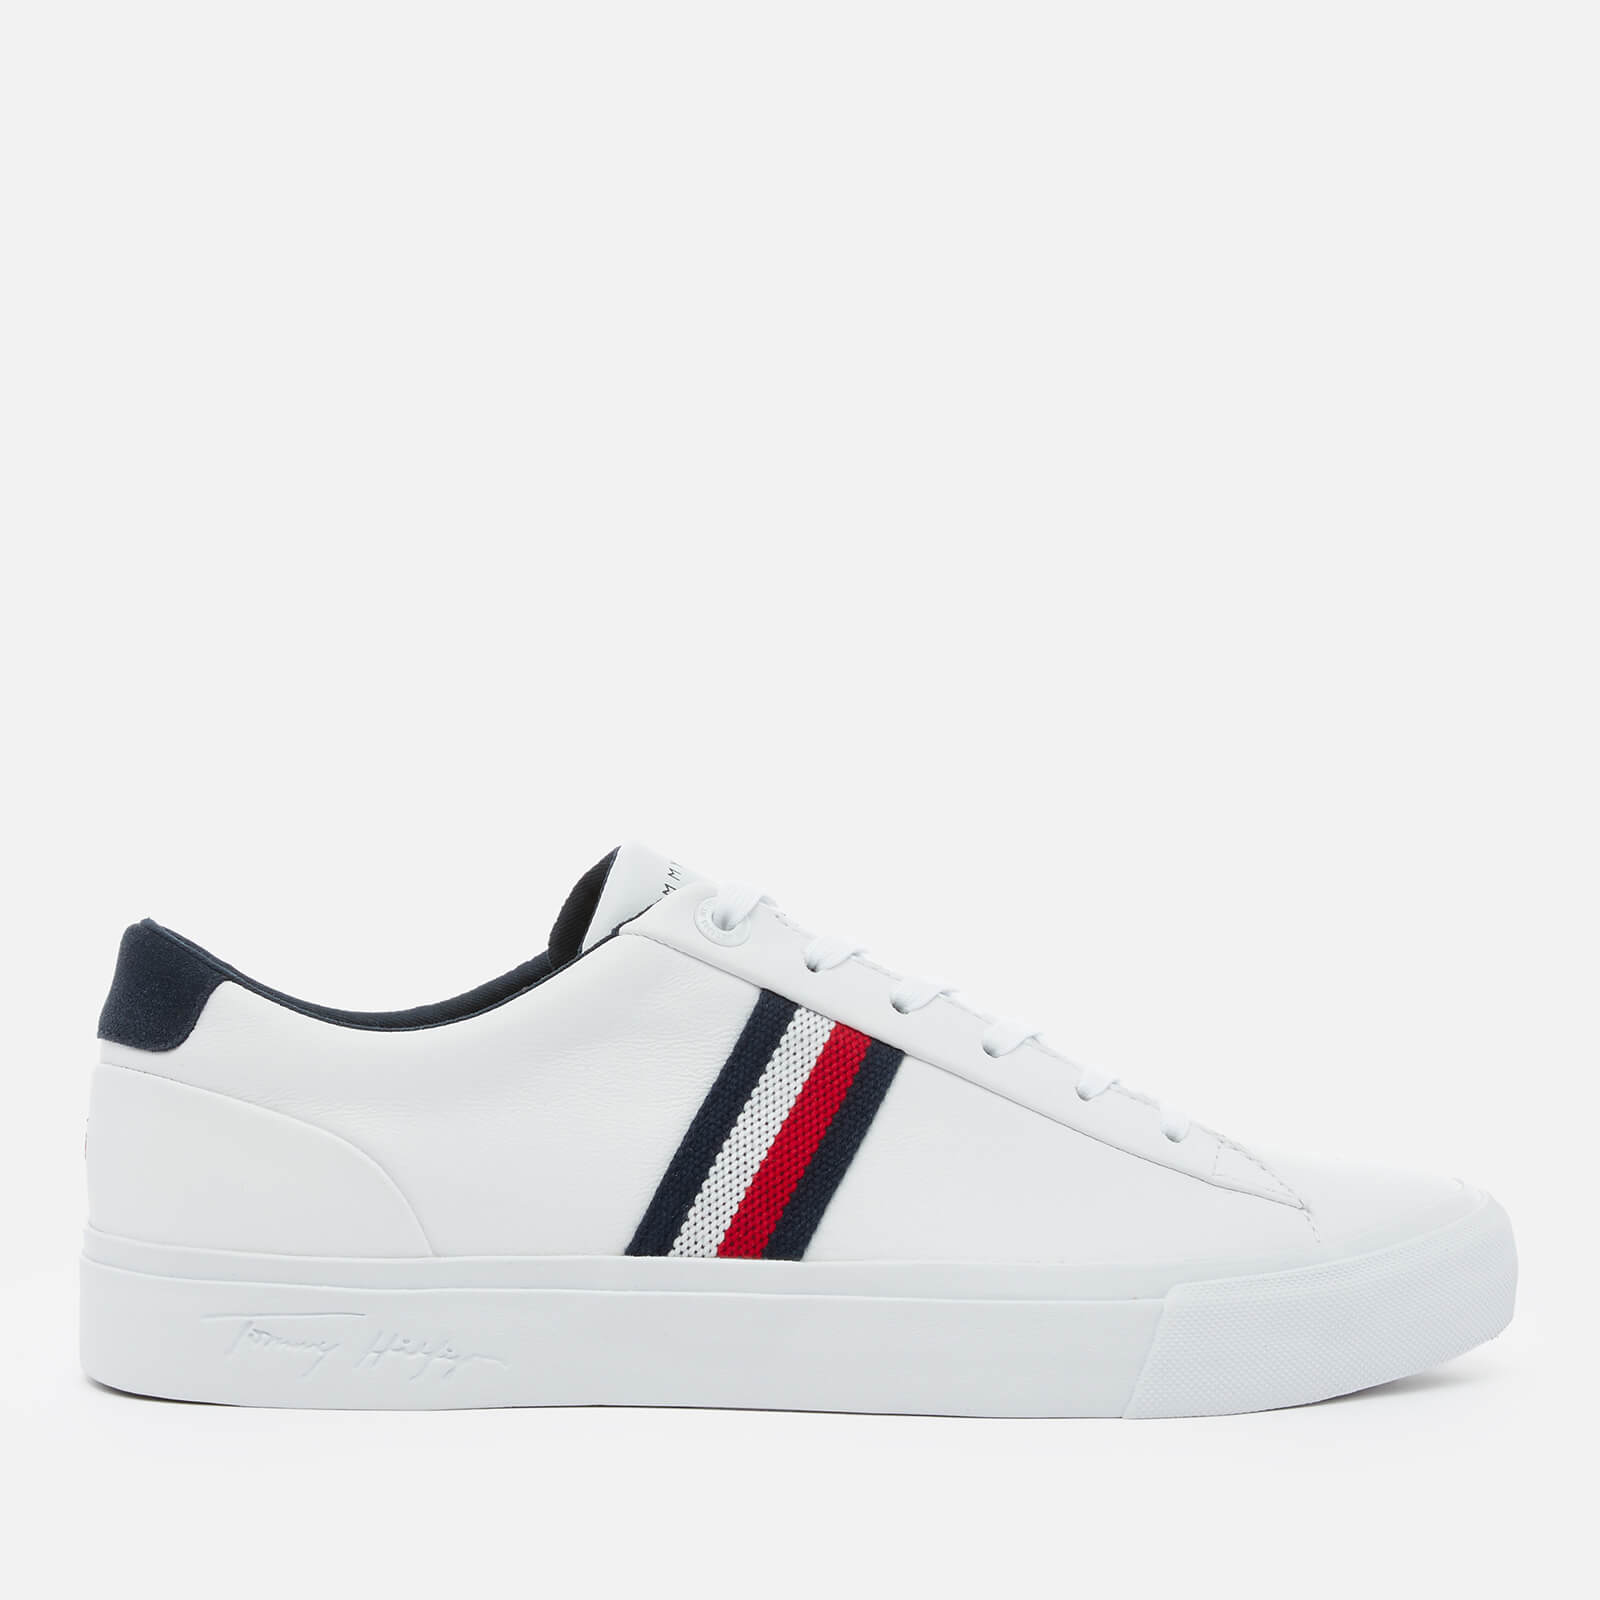 Tommy Hilfiger Men's Corporate Leather Low Top Trainers - White - UK 11